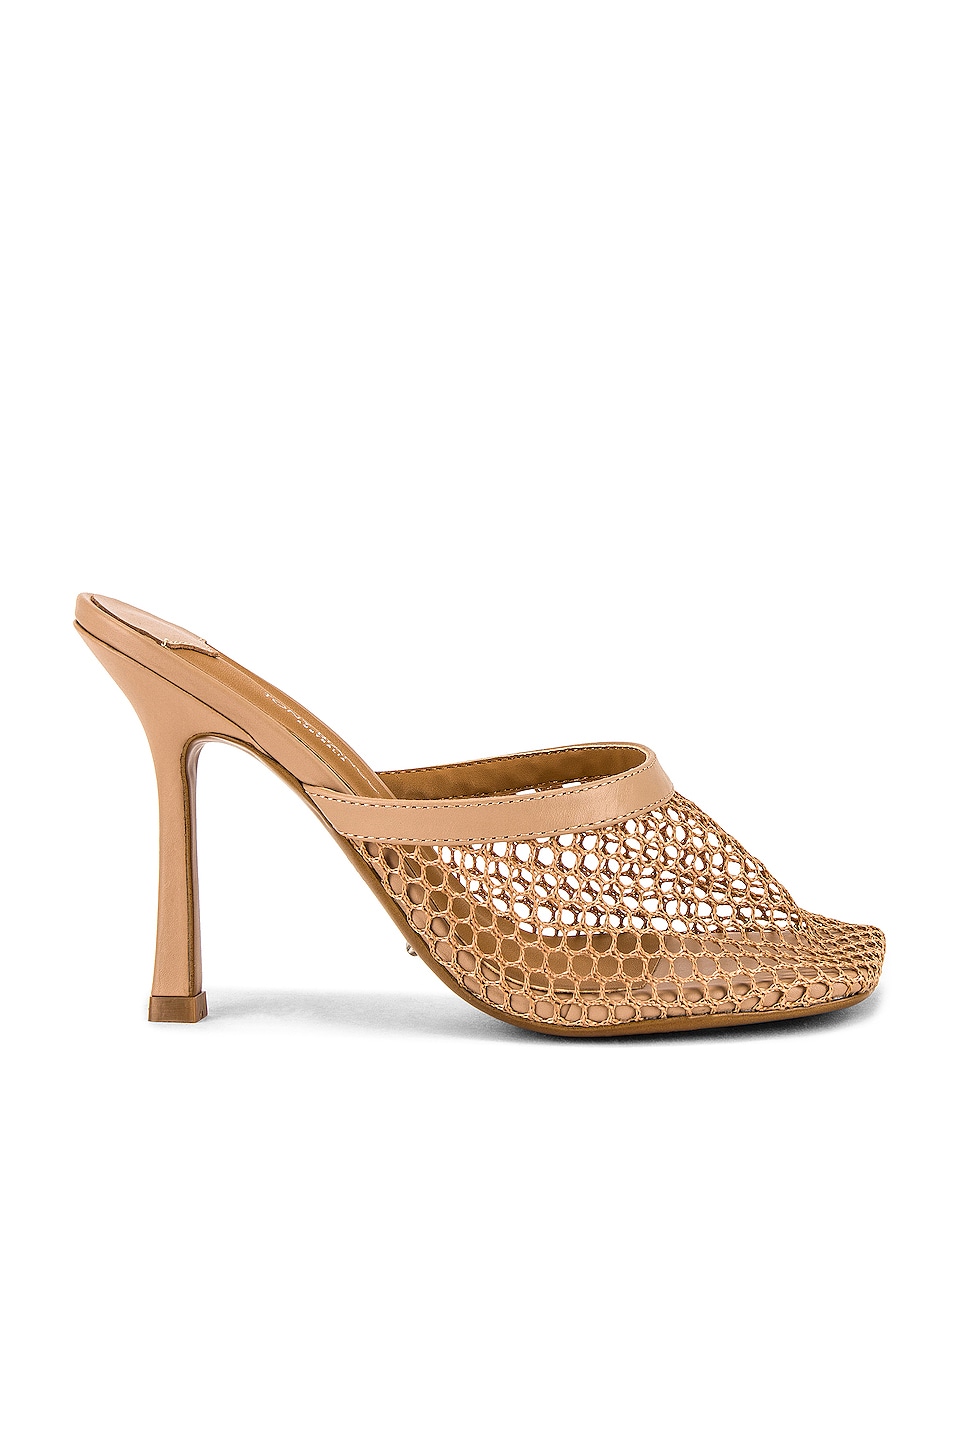 Indi Mule in Nude. Revolve Women Shoes Flat Shoes Mules 